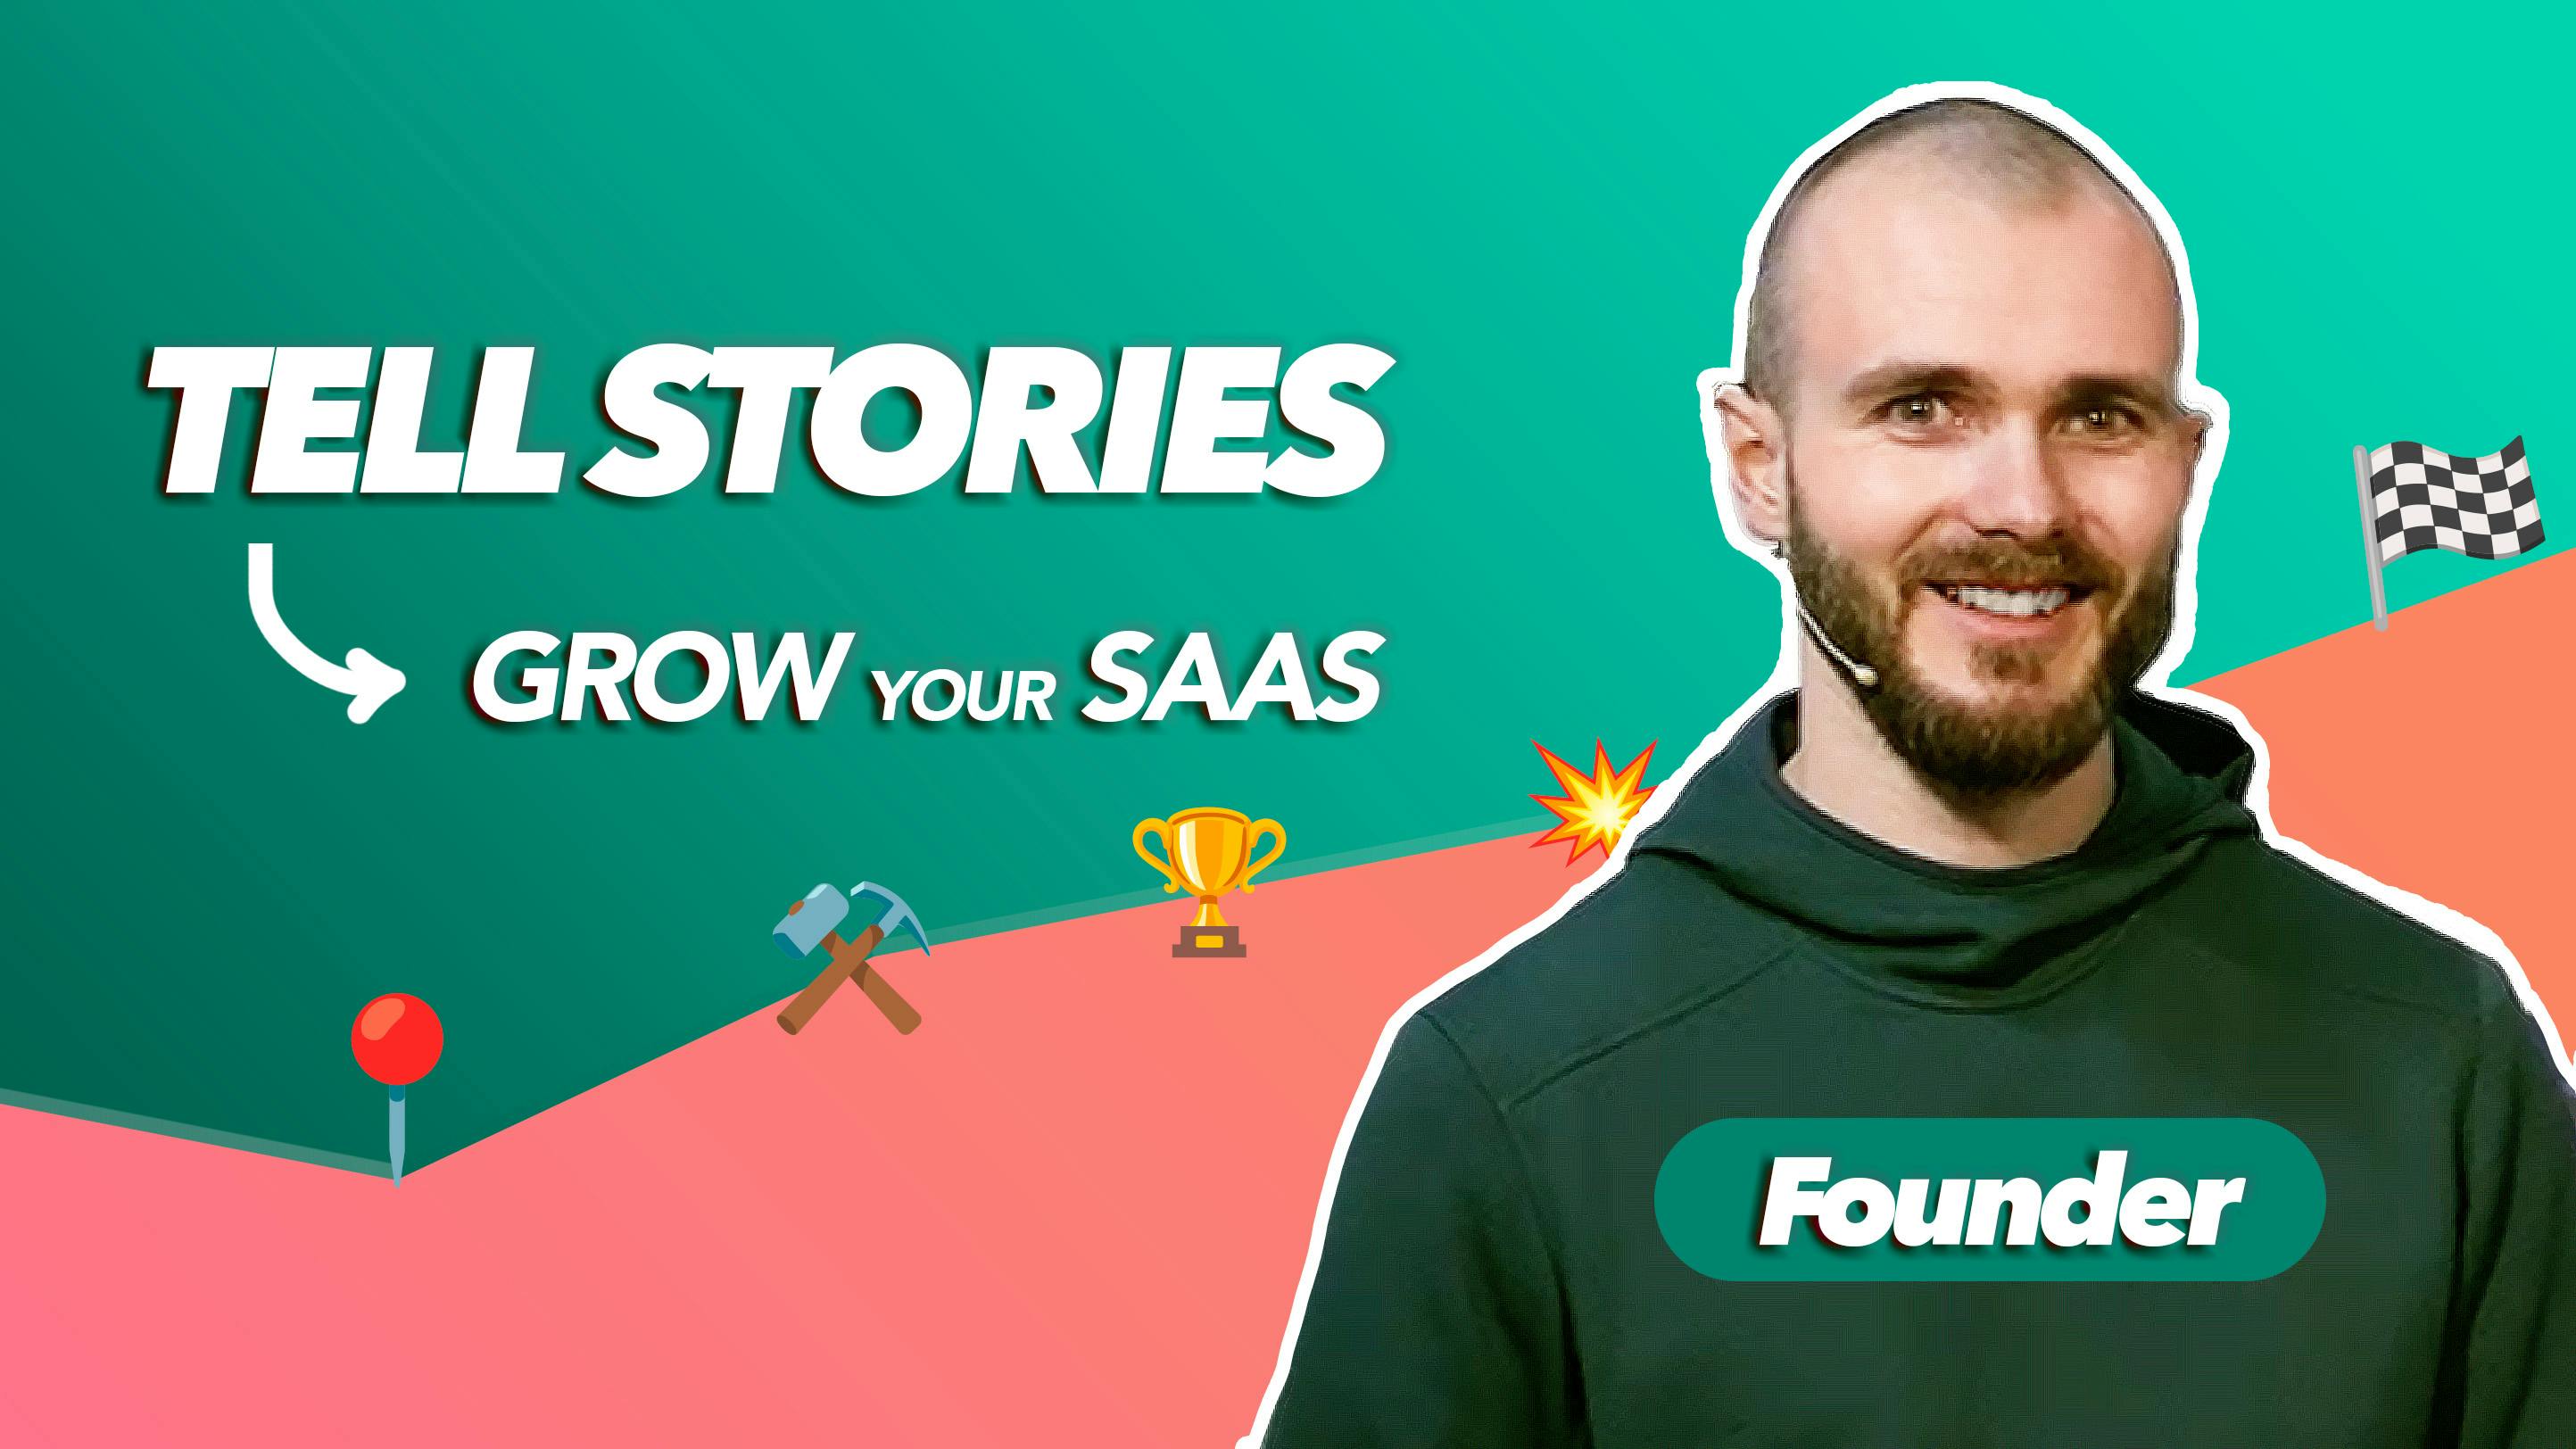 Storytelling as Growth Marketing - Build your founder story (examples)